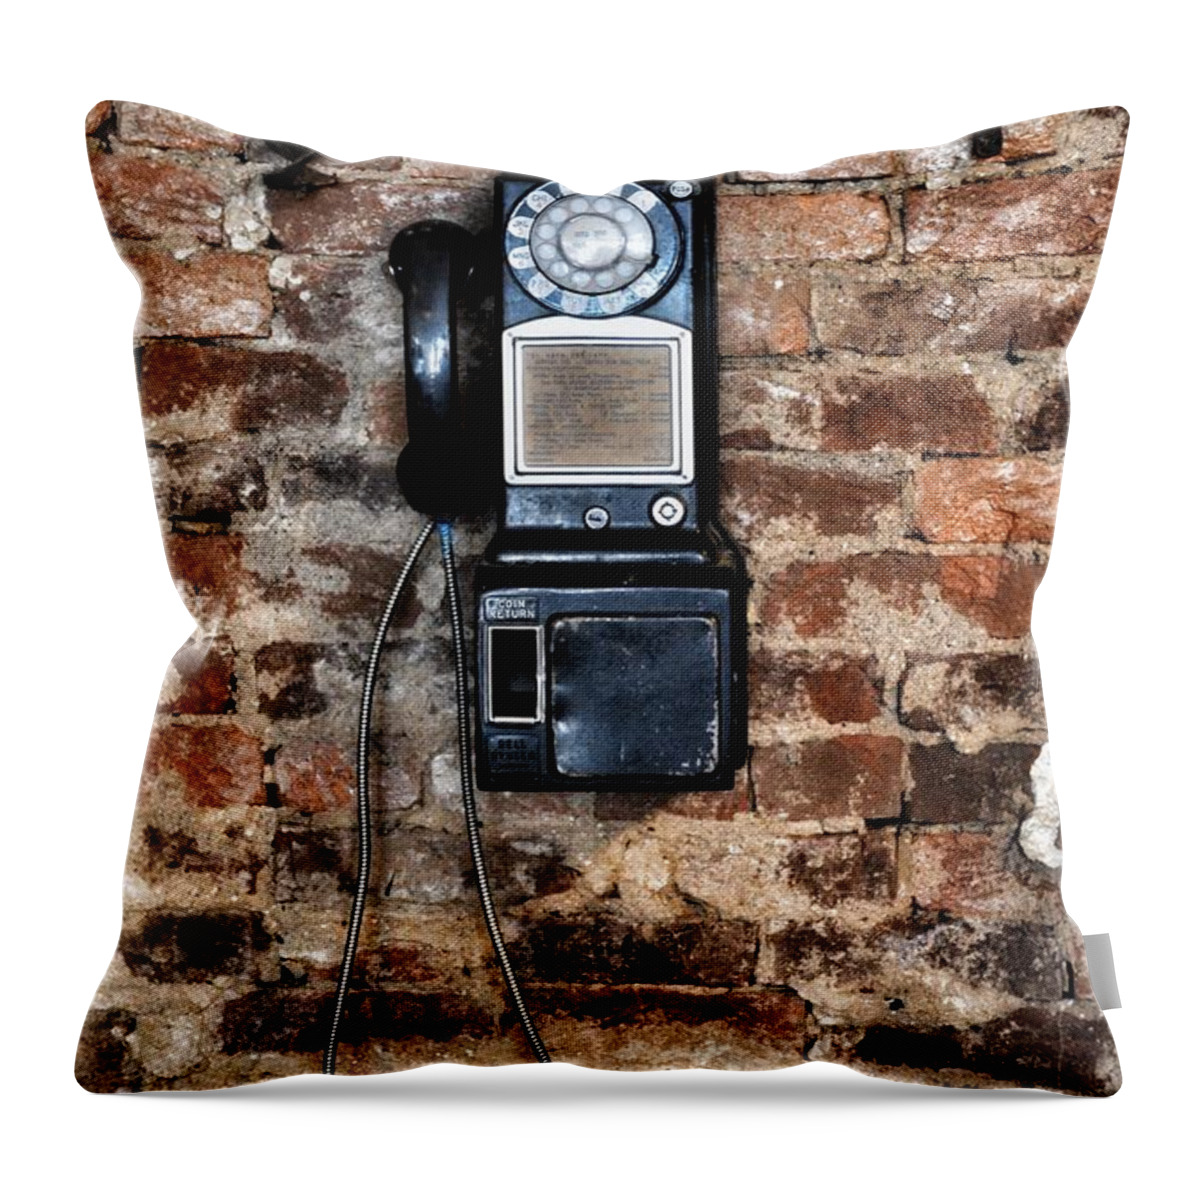 Phone Throw Pillow featuring the photograph Pay Phone by Joseph Caban